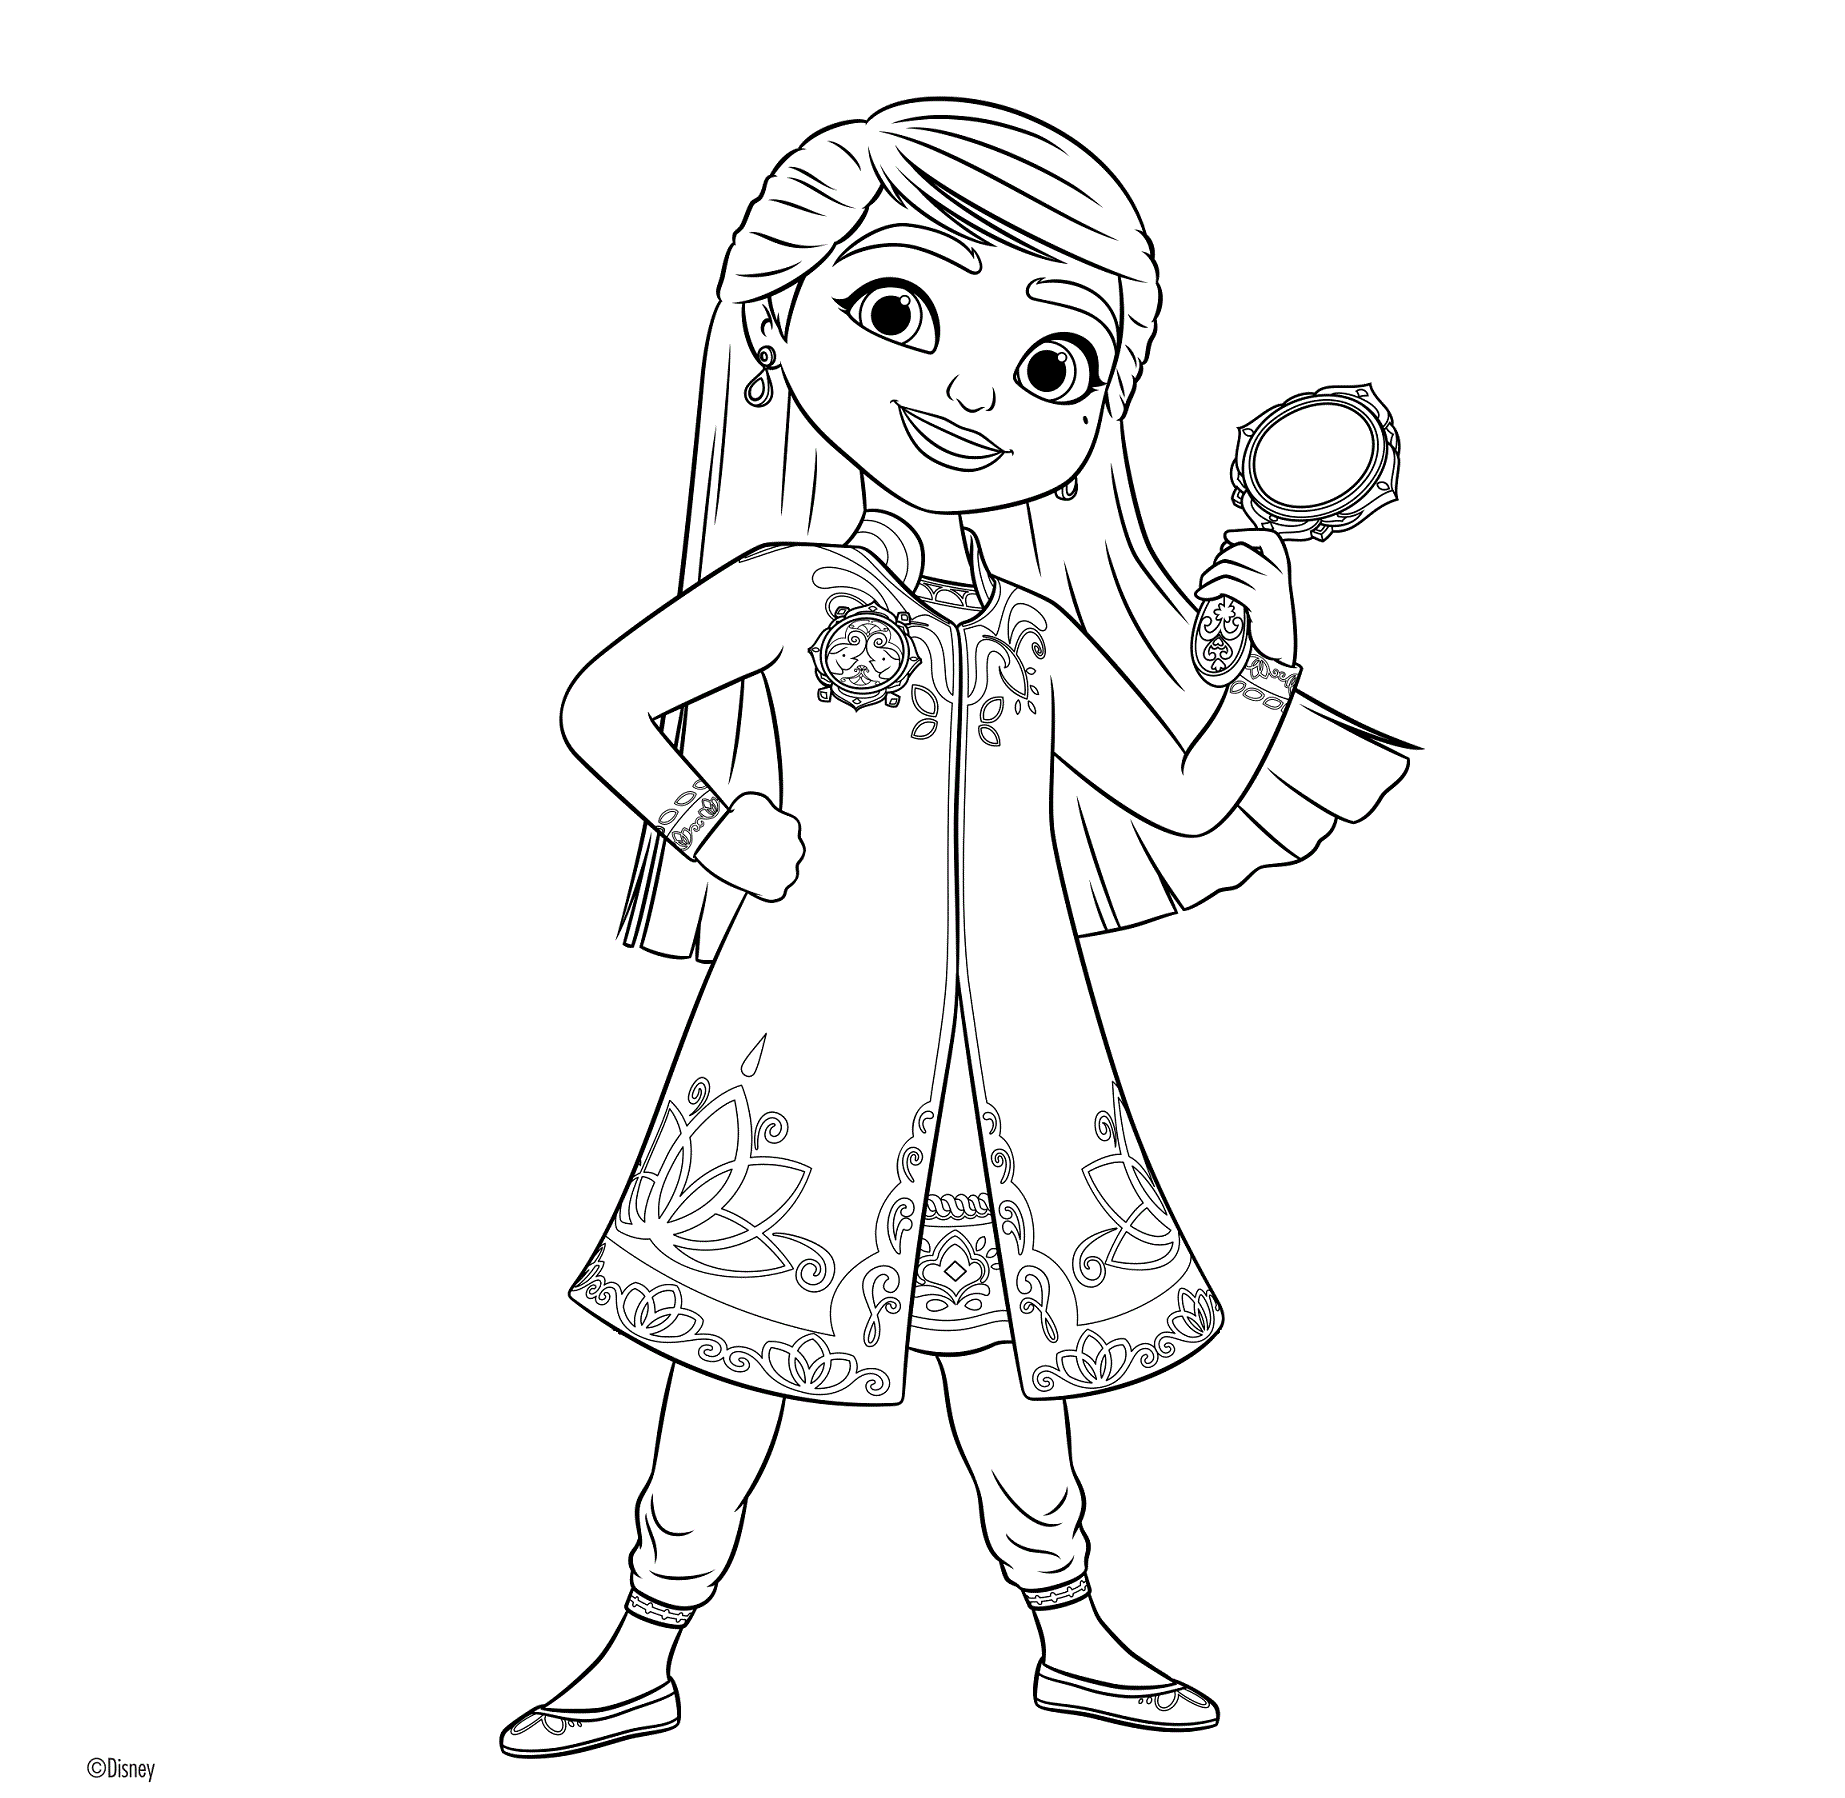 Mira Coloring Pages Pdf For Kids - Mira Coloring Pages